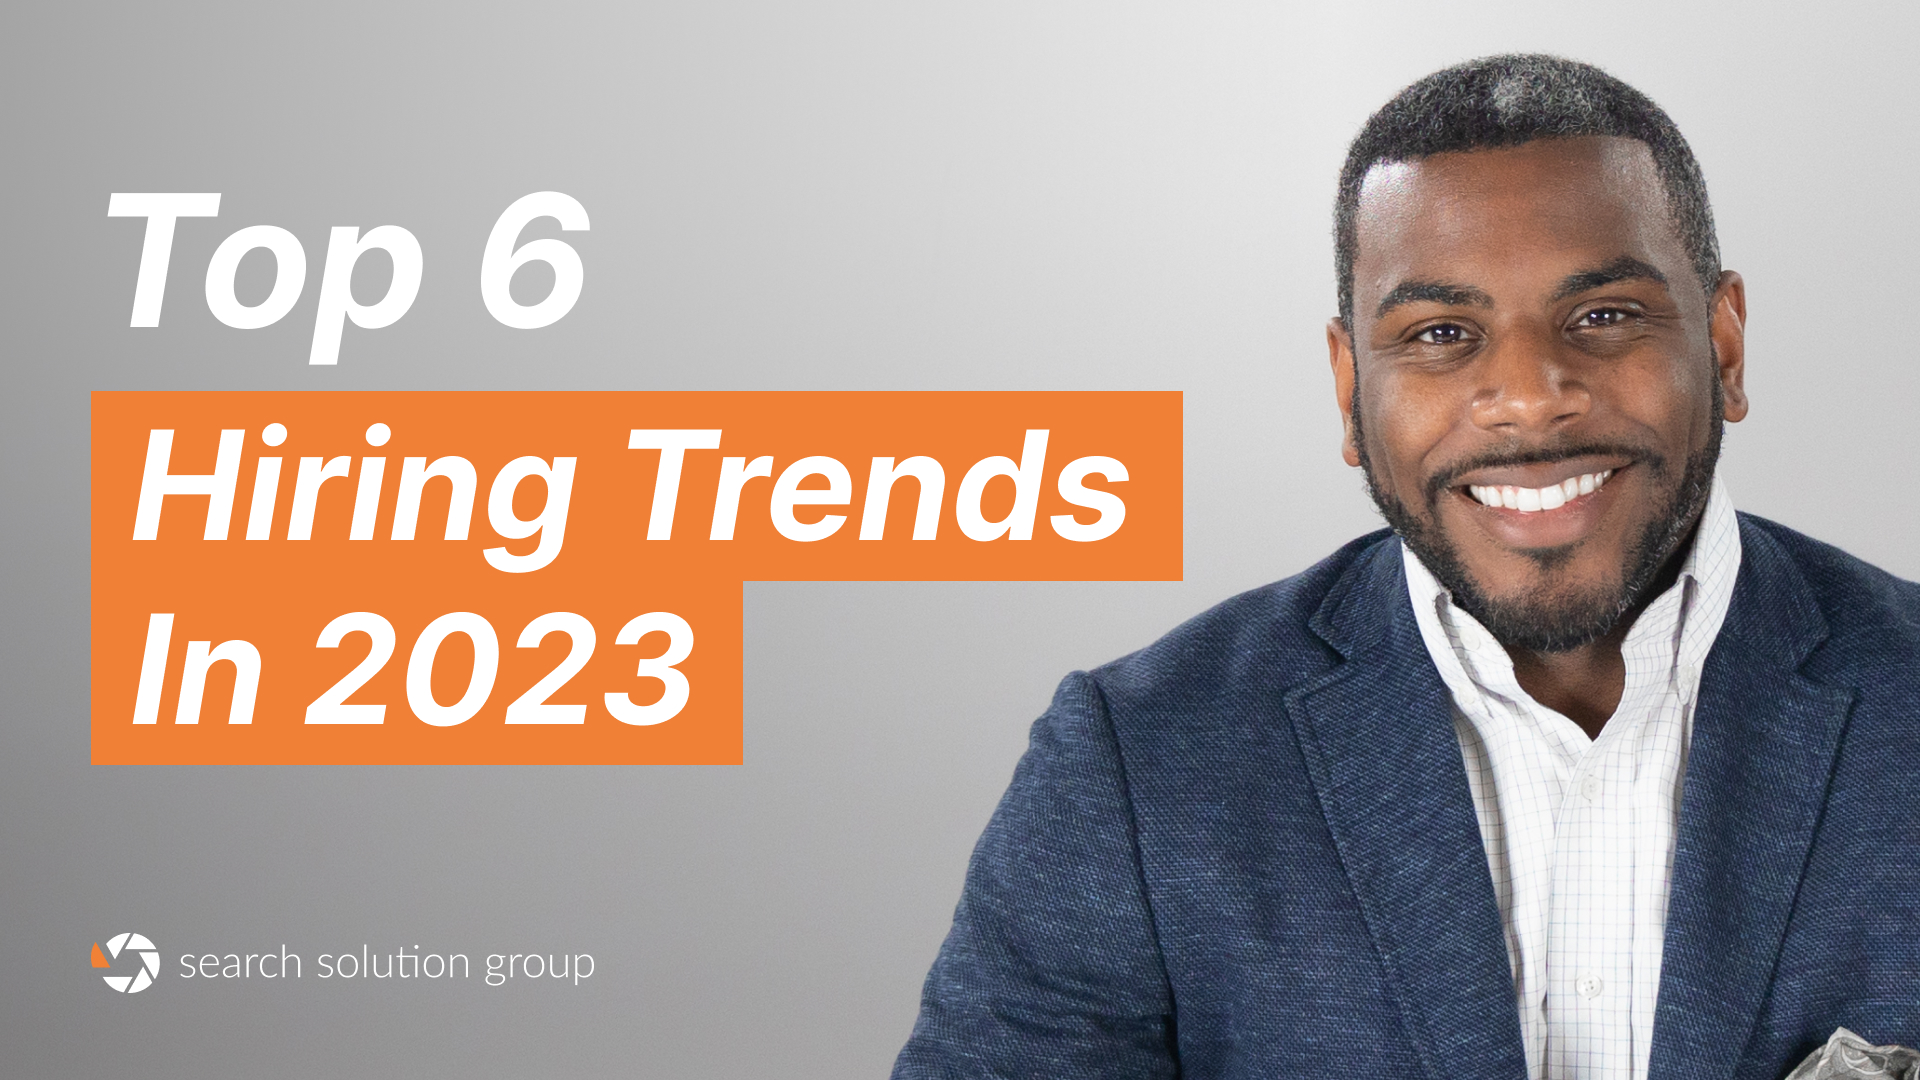 Top 6 Hiring Trends for Employment in 2023